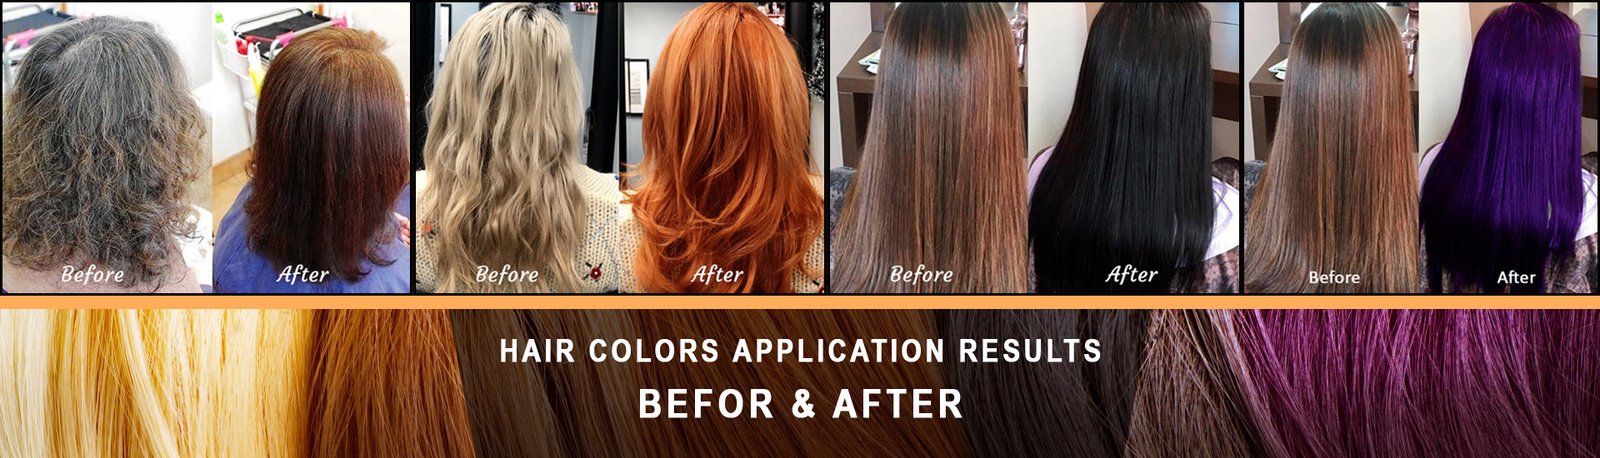 Before and After Hair Colors Application Result